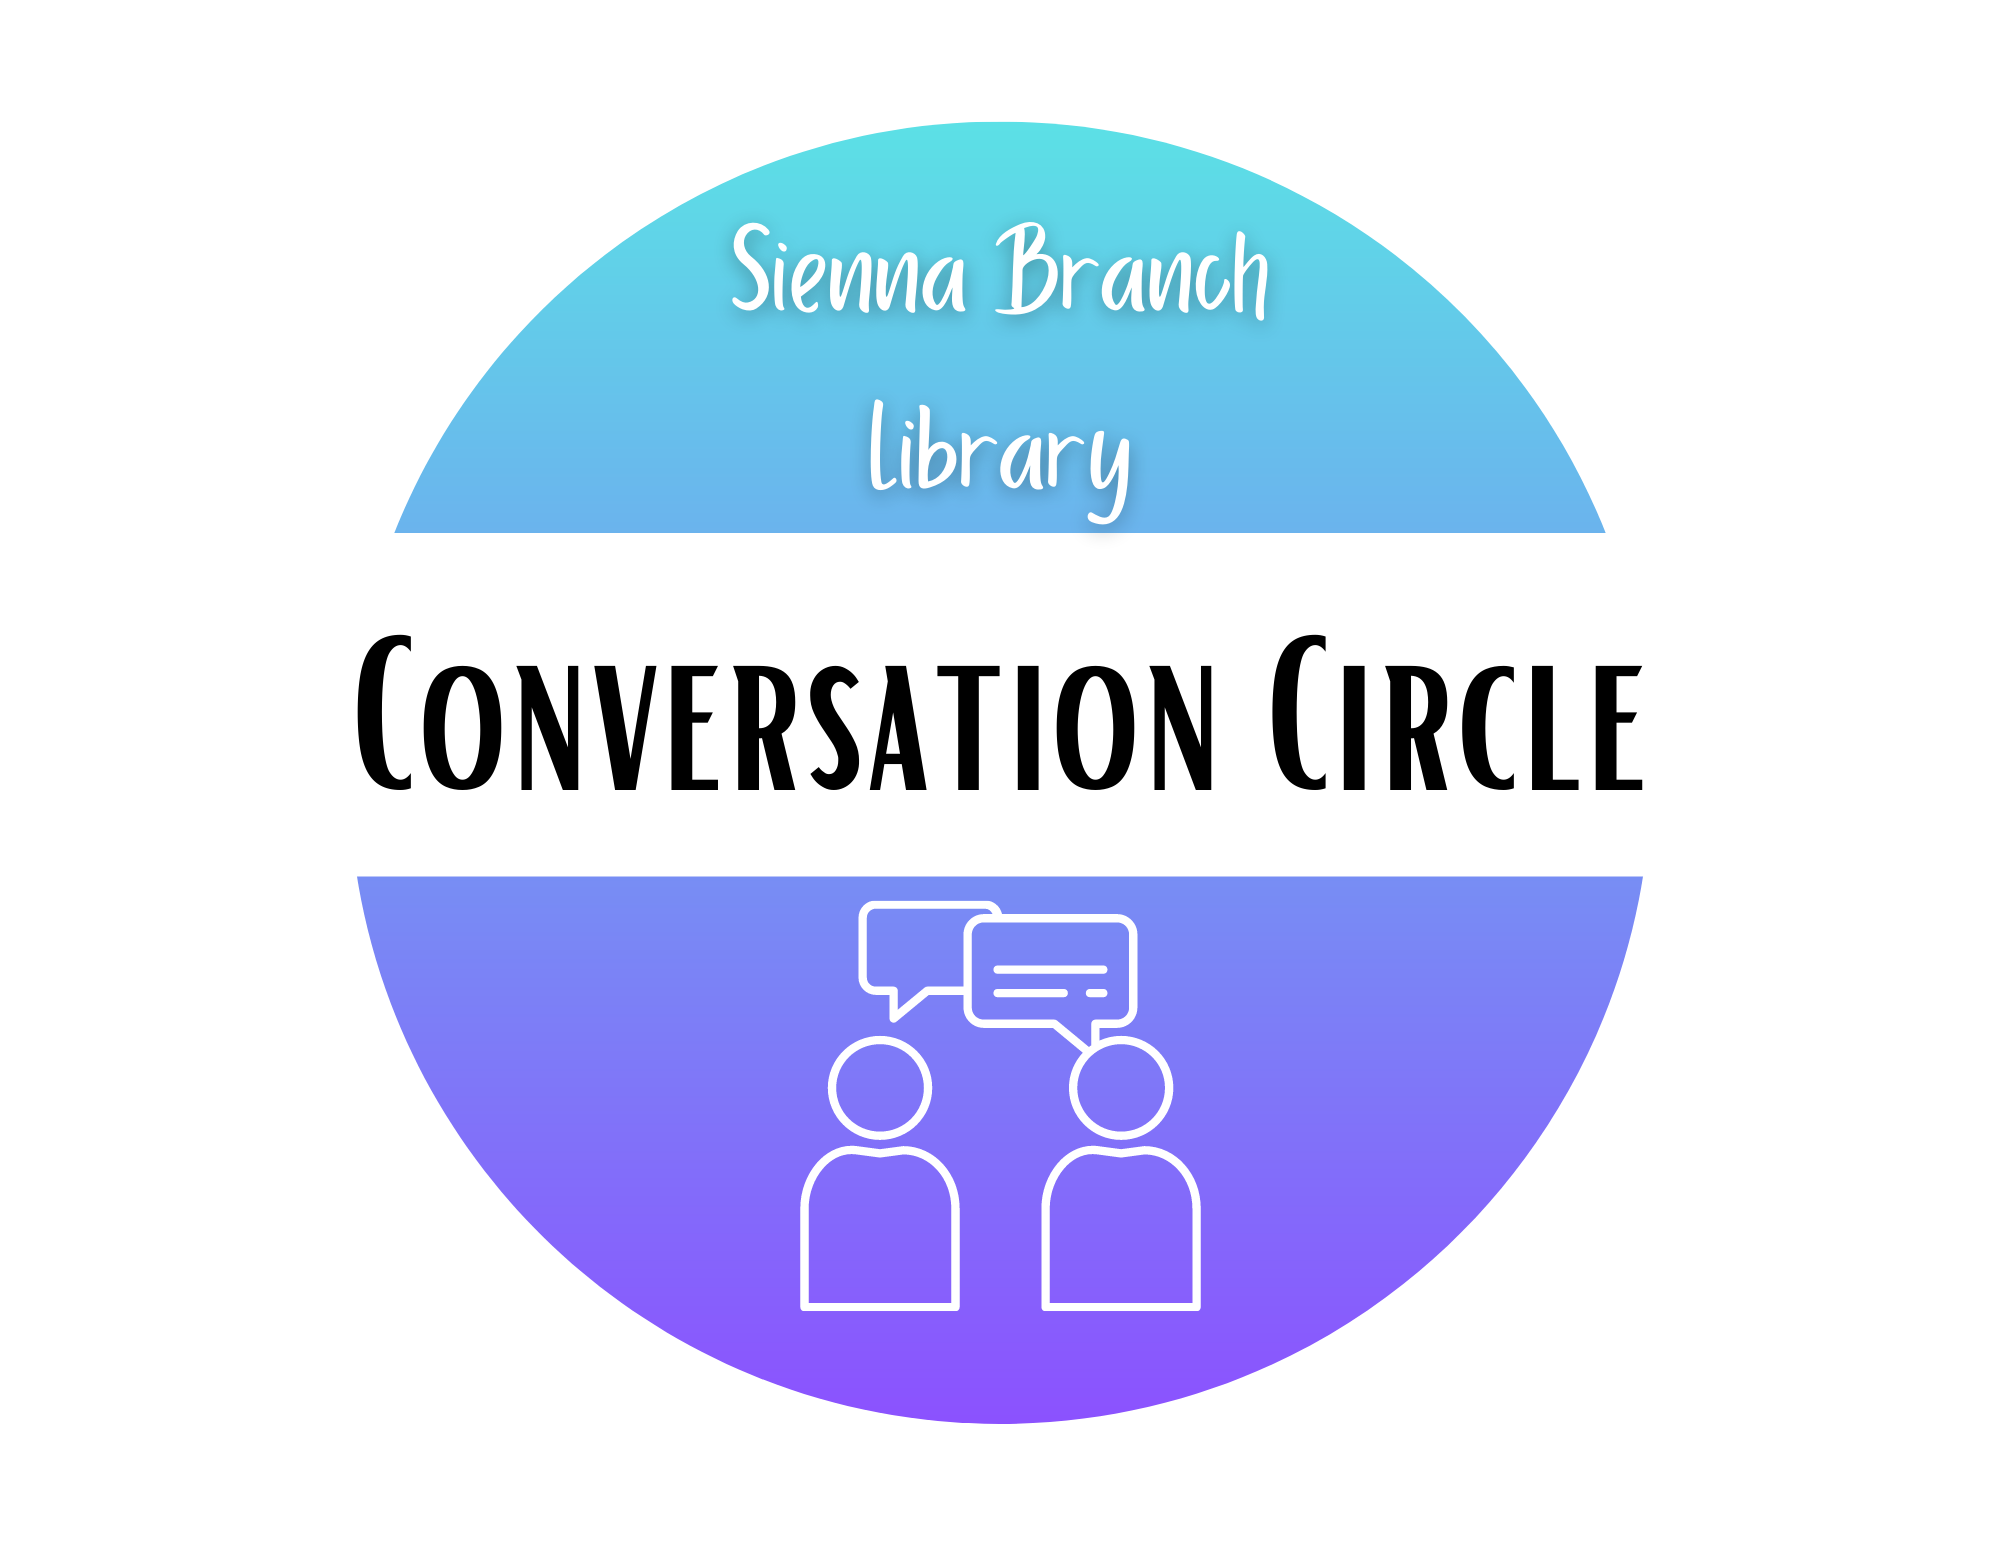 graphic of abstract people with chat bubbles above their heads; above this image is the phrase "Sienna Branch Library Conversation Circle"